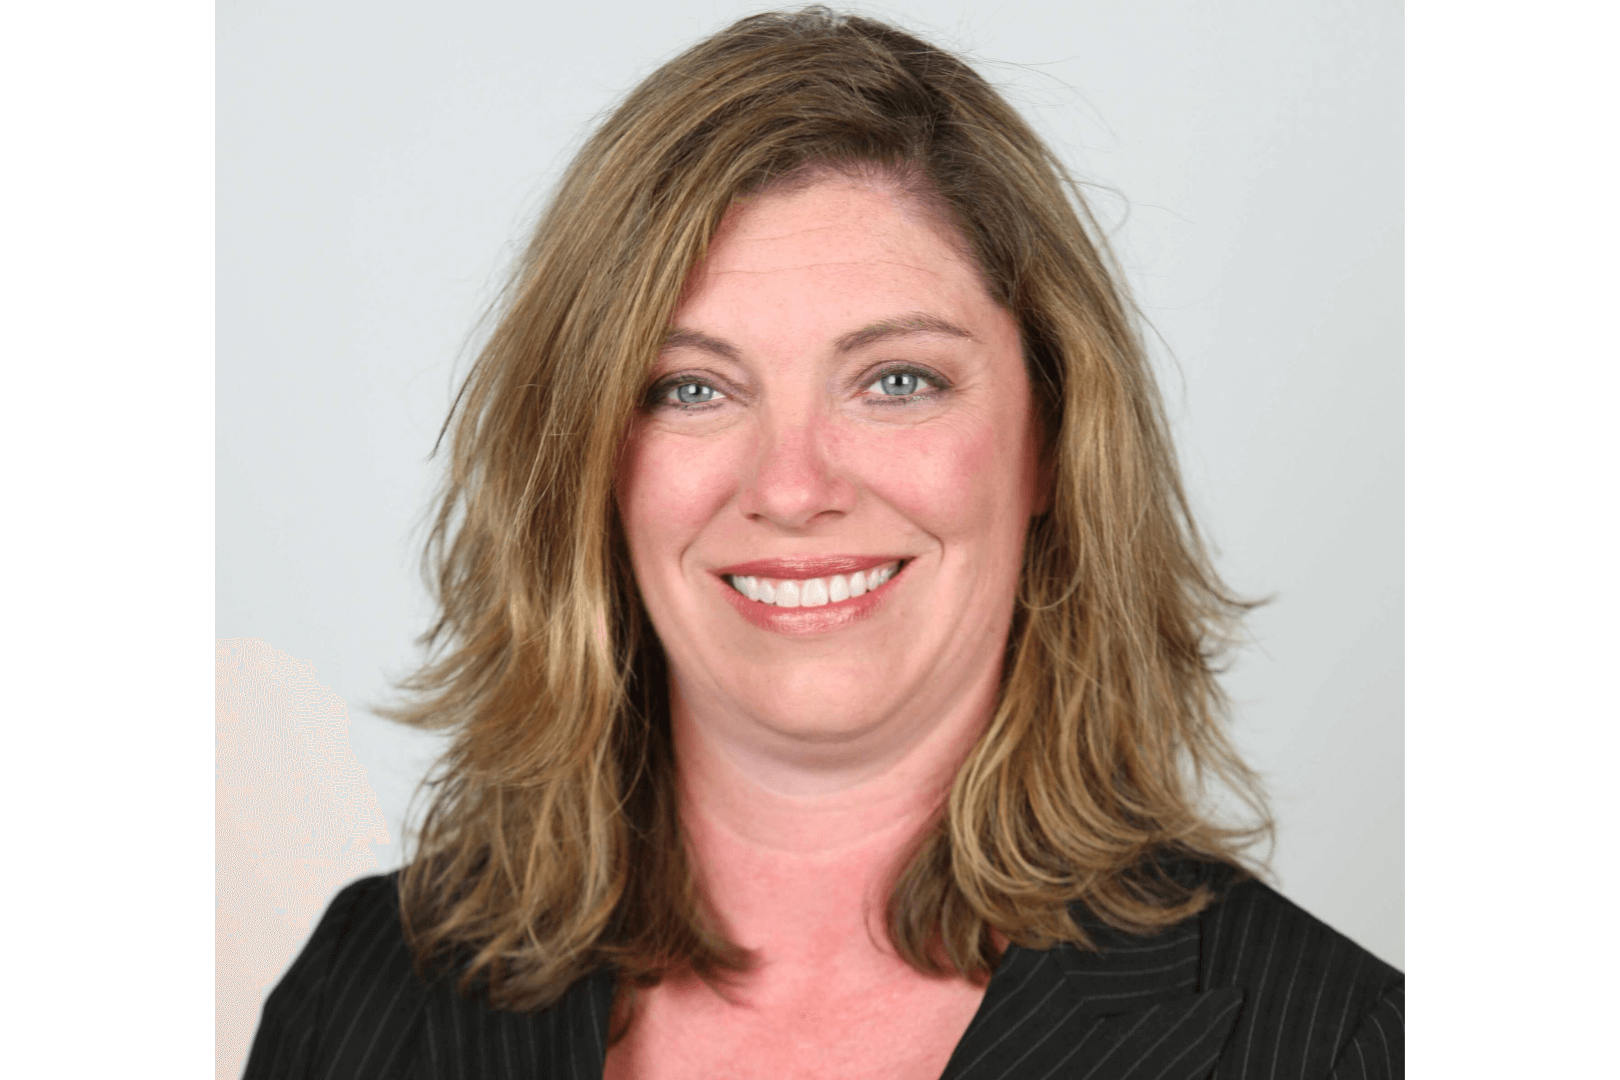 UAH Alumna Becky Harris steps into CFO role at Hexagon